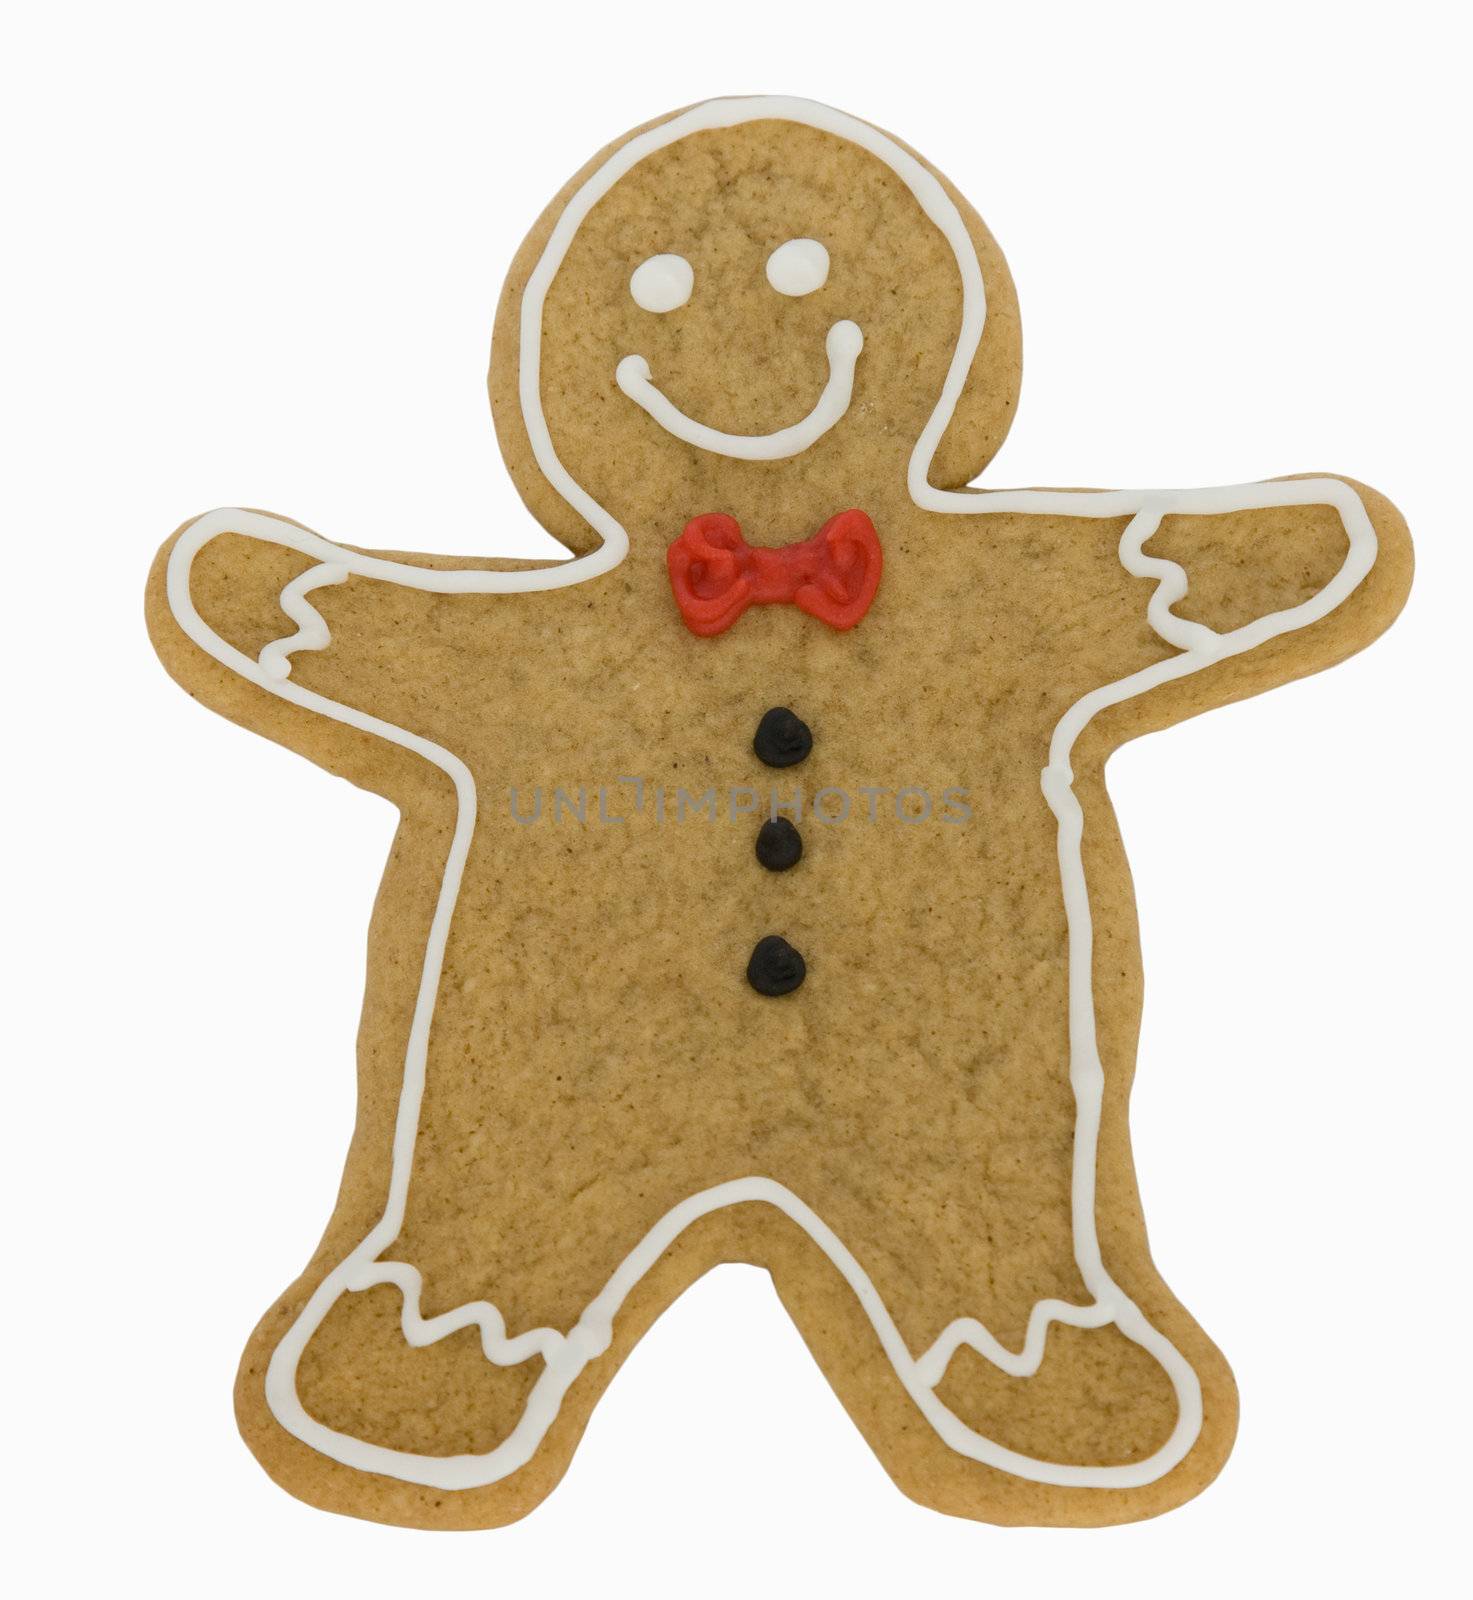 Gingerbread man isolated against a white background